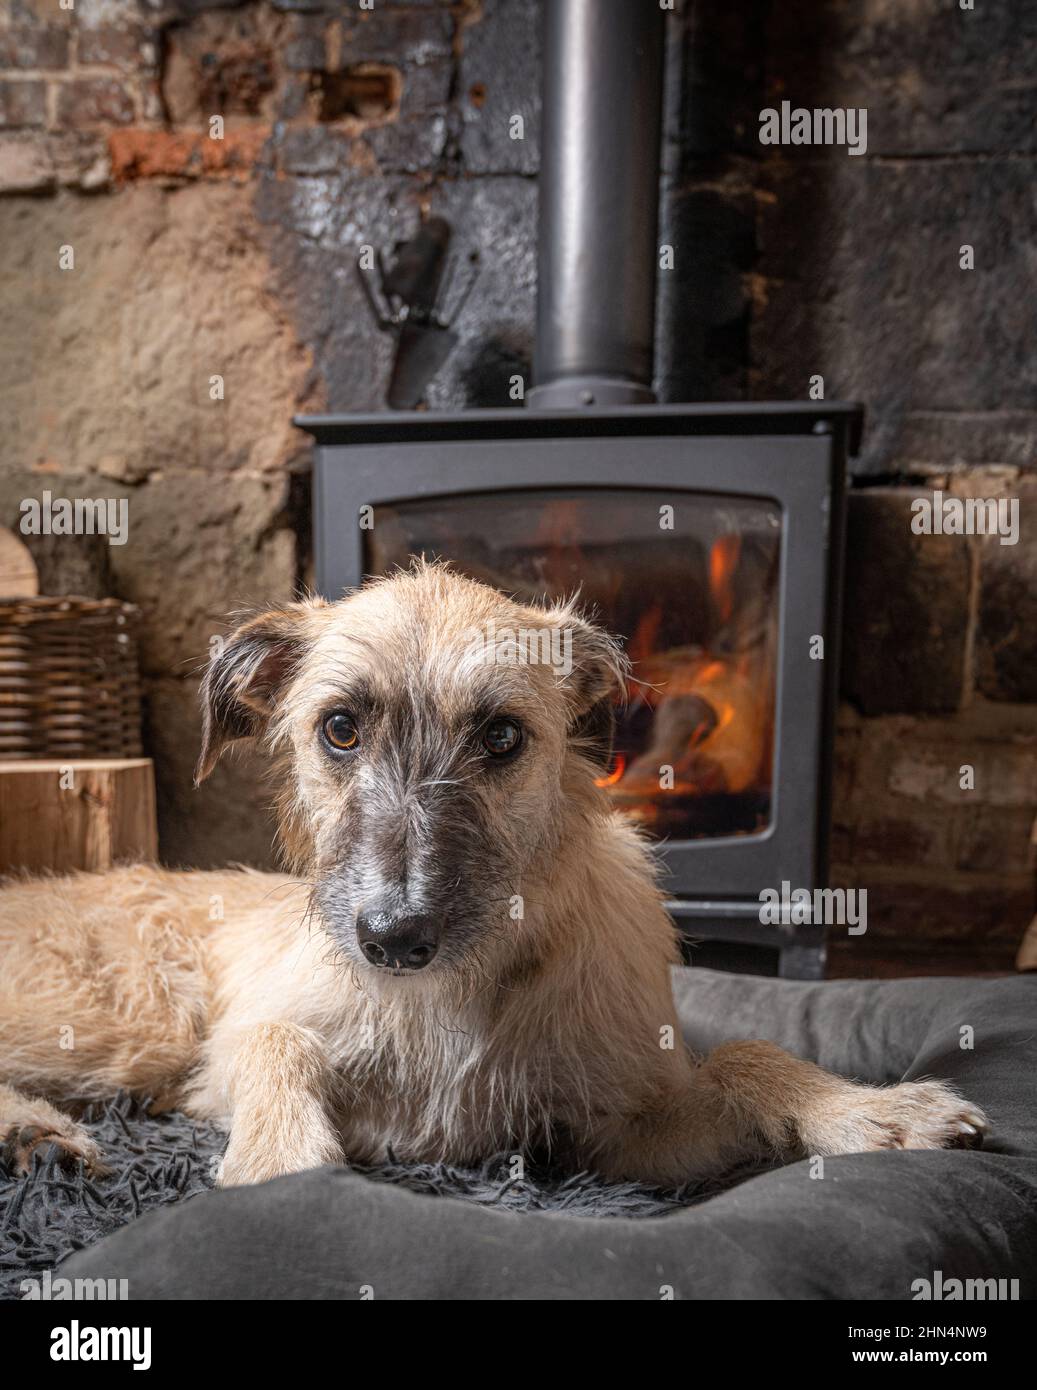 a dog sitting in front of a wood burner fire Stock Photo